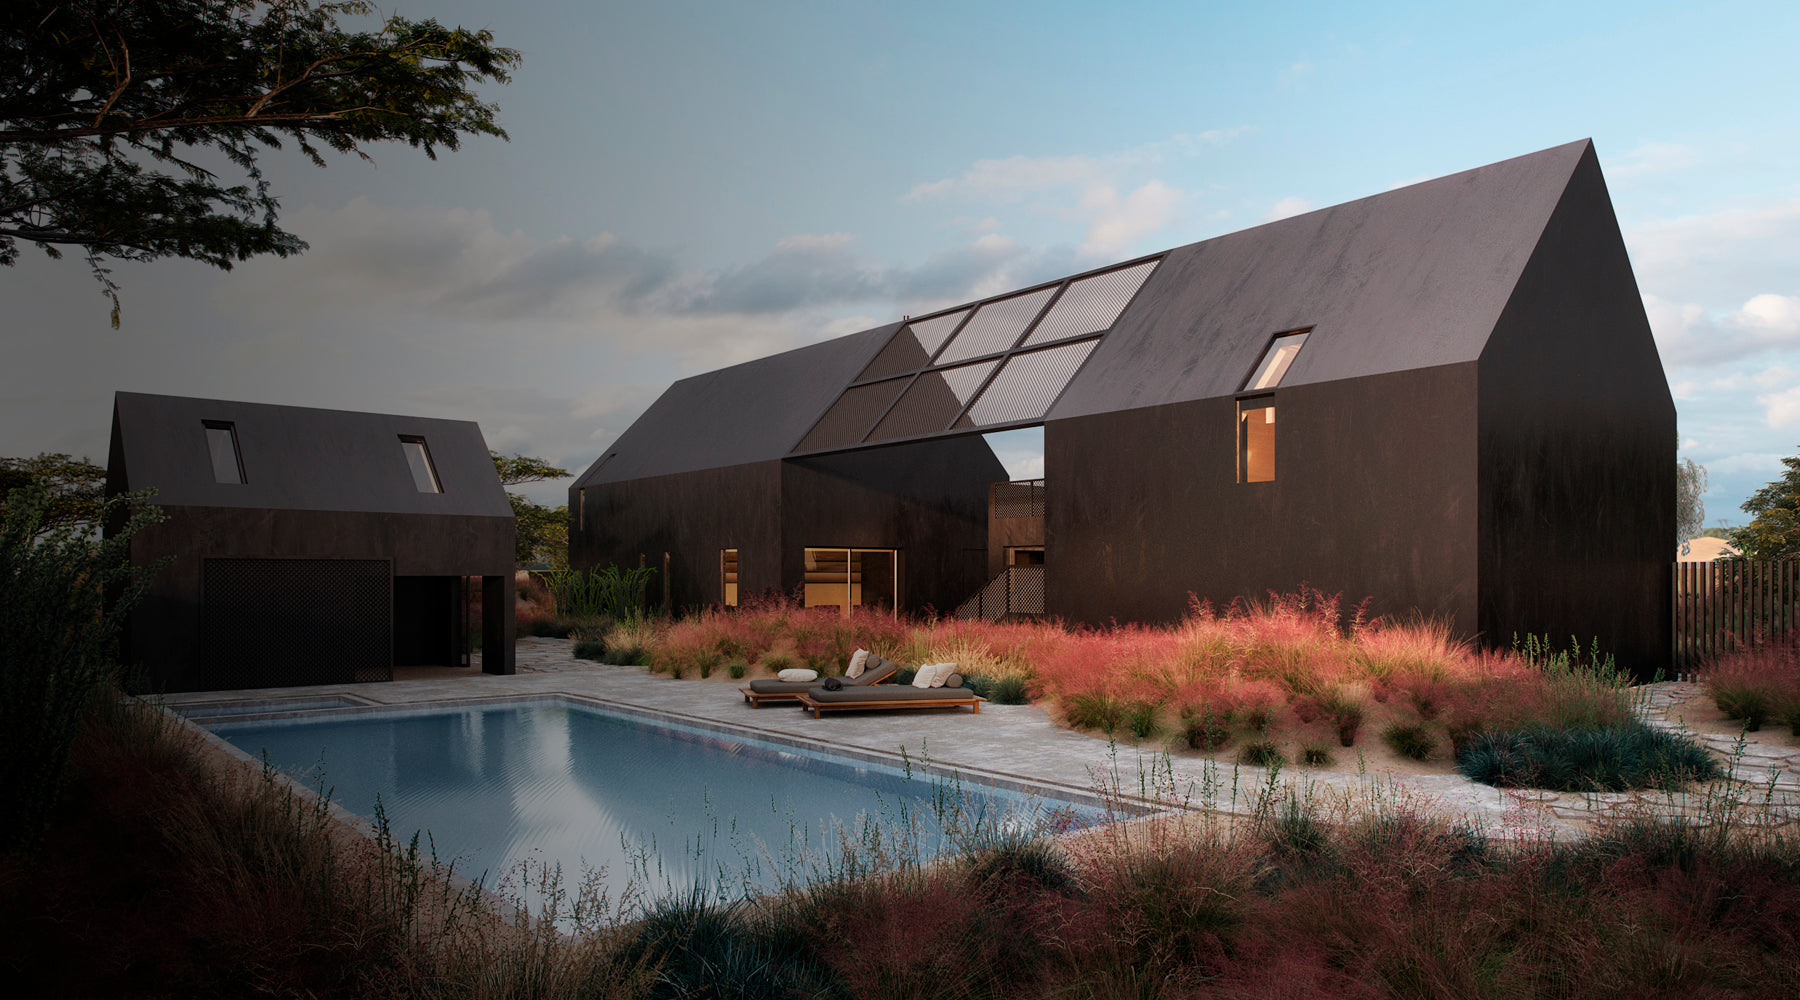 Metal cabin-style home with a pool in Las Vegas, built by Jewel Homes, designed by Peter Lik."